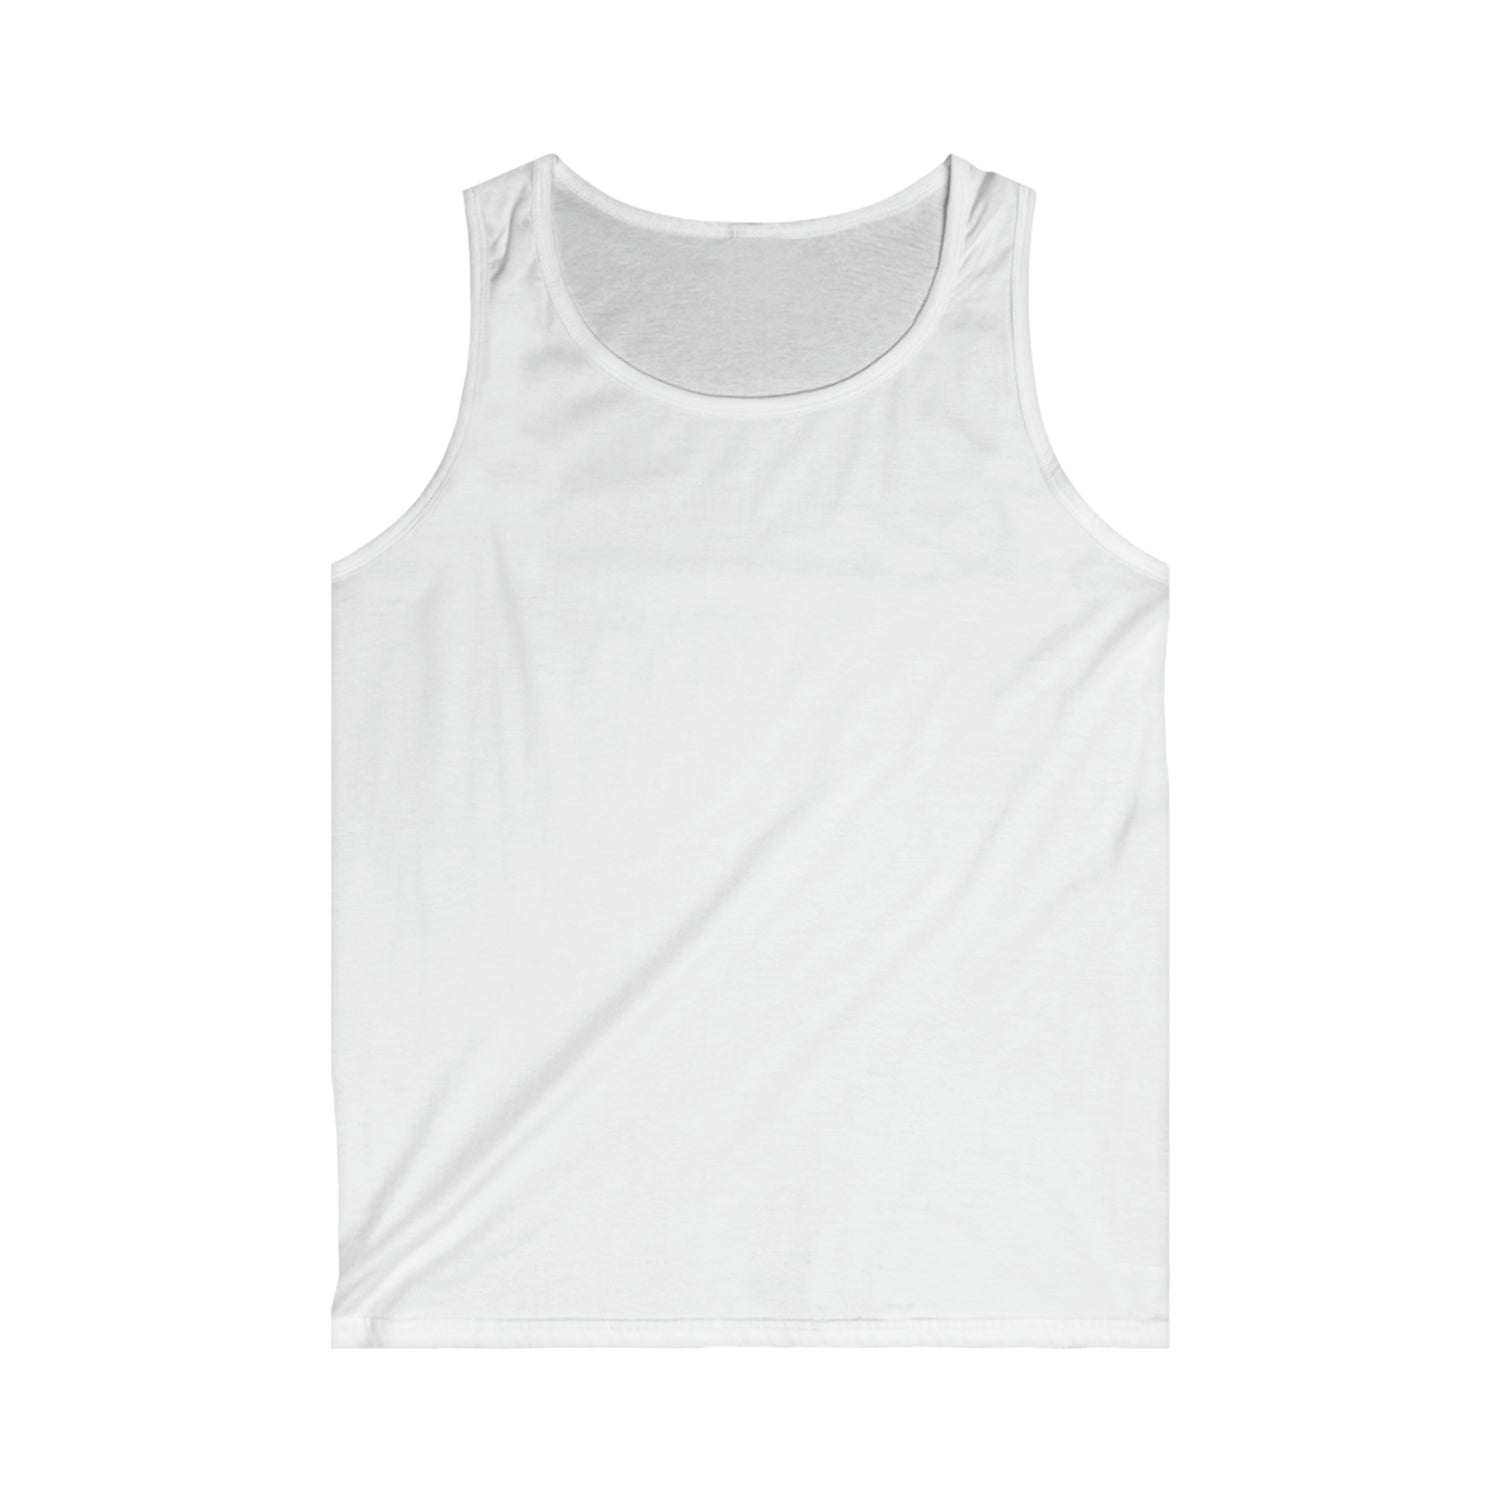 Men's Softstyle Tank Tops